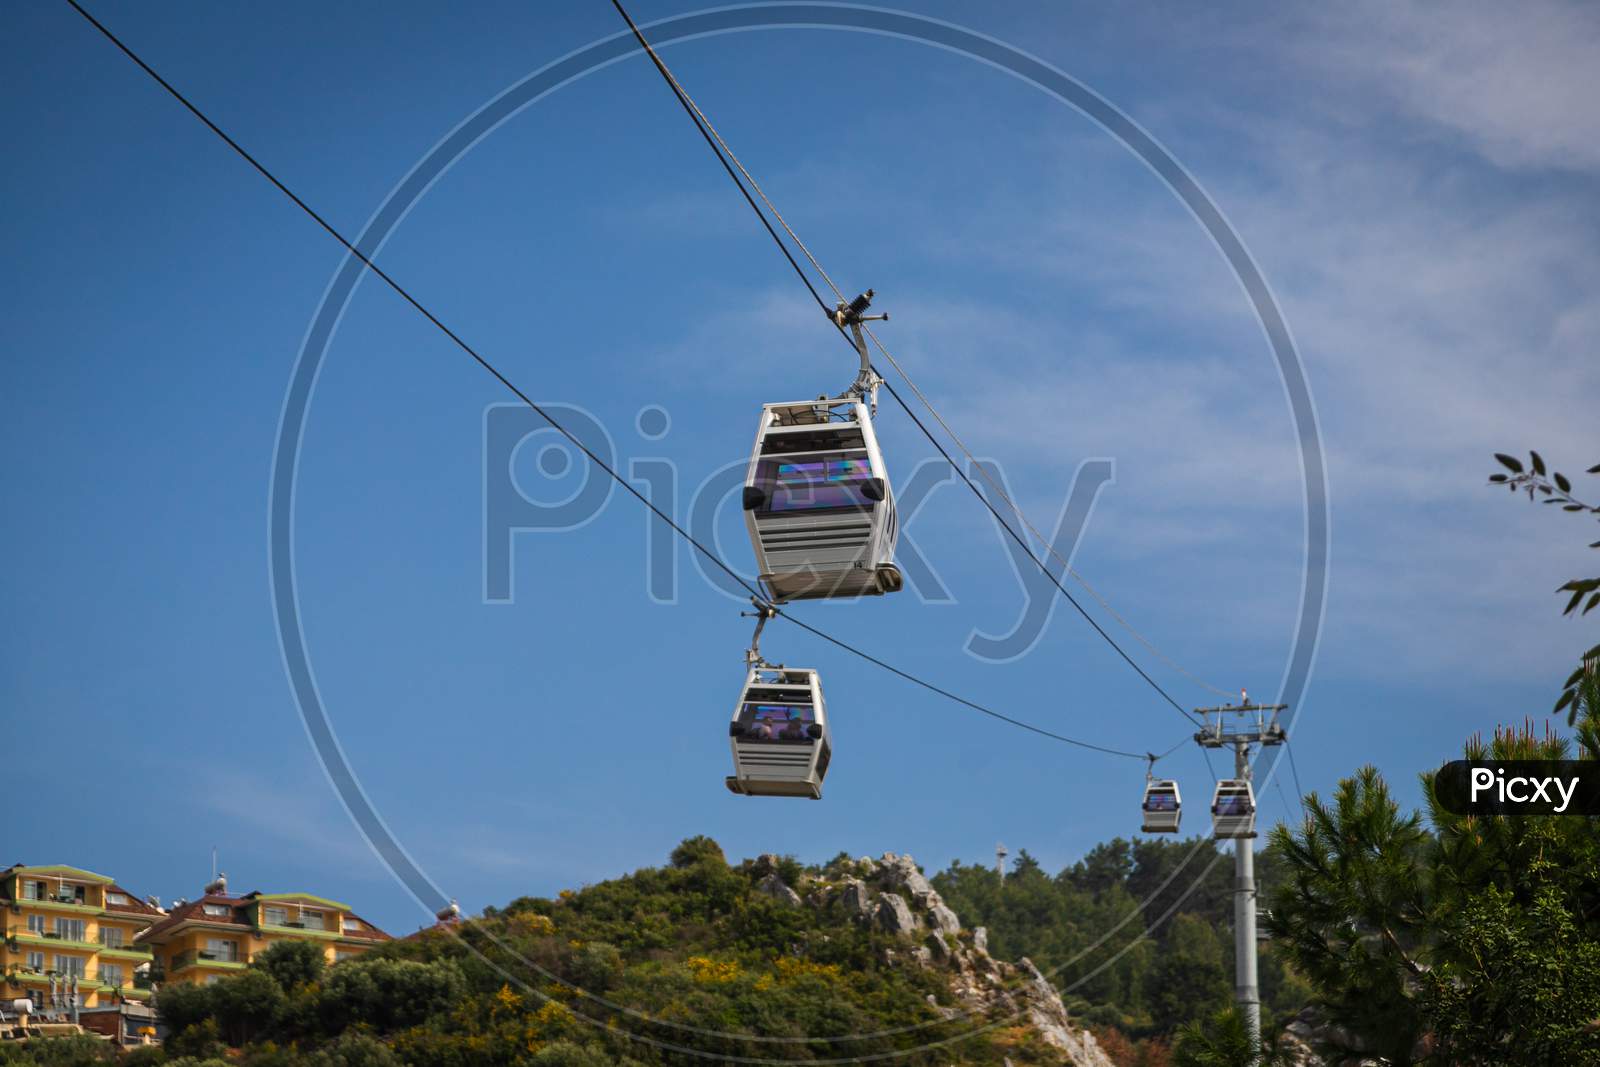 Rope Way Over Cloudy Blue Sky. Funicular Cabins And Aerial City Skyline Panoramic View In Turkey